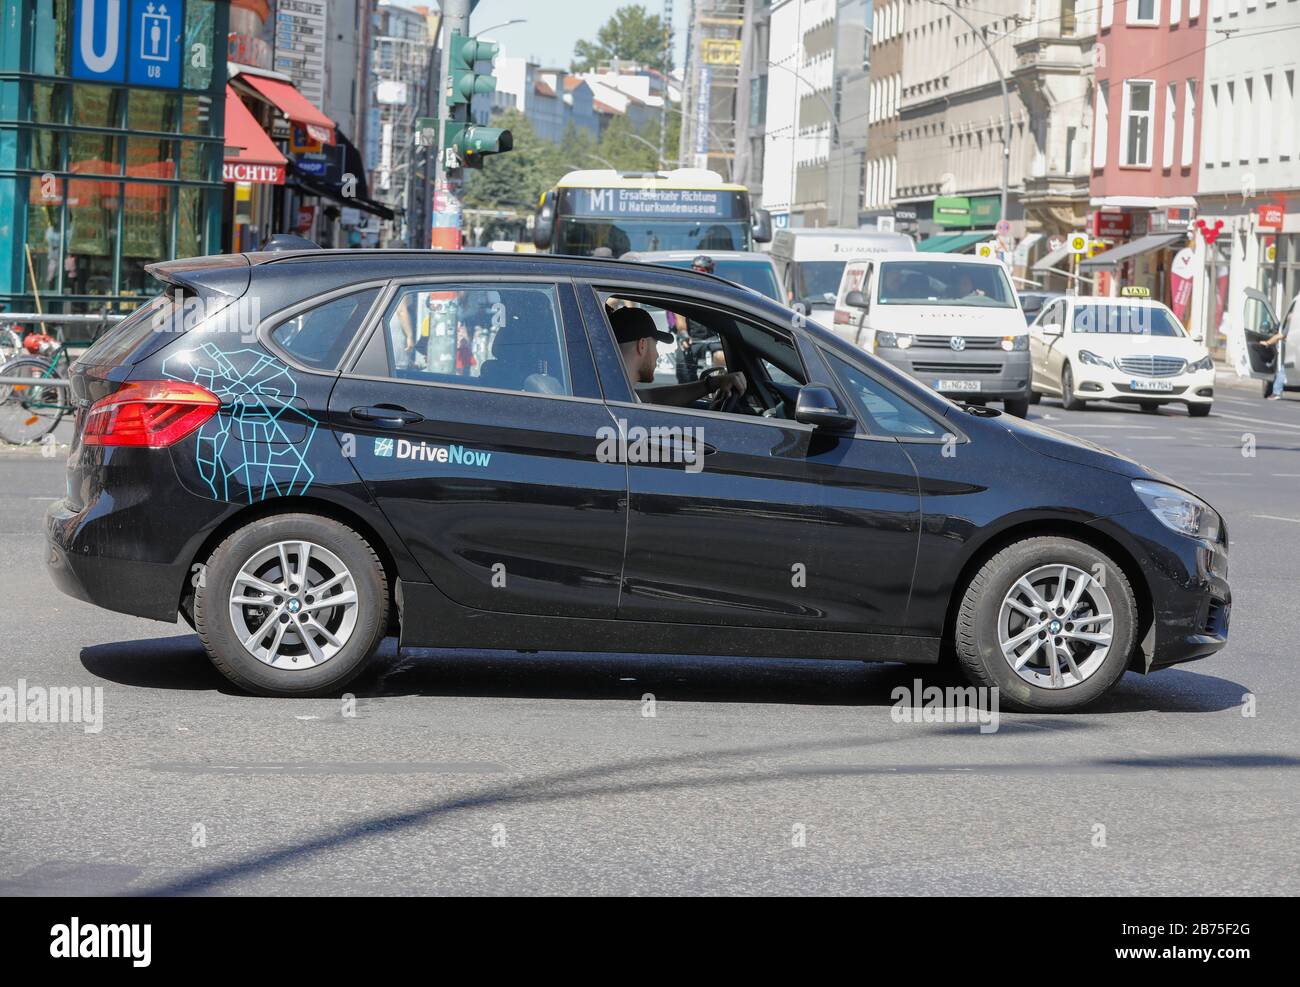 A BMW from DriveNow Car Sharing in Berlin, on 07.08.2018. More than 3,000 models of BMW and MINI are available for rent in five German DriveNow cities. [automated translation] Stock Photo